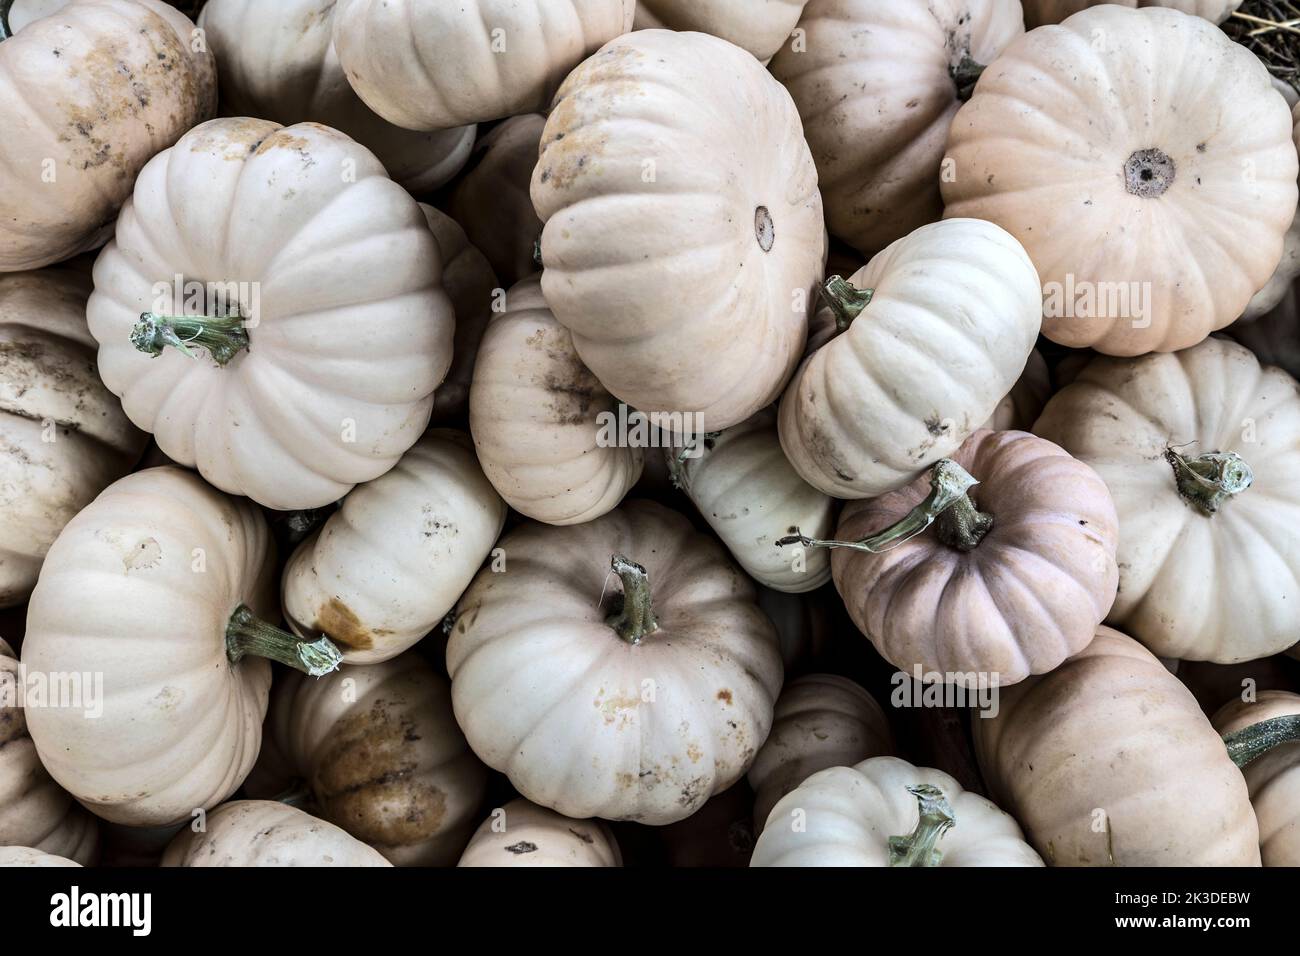 Pile of small white pumpkins at the farmers market. Stock Photo